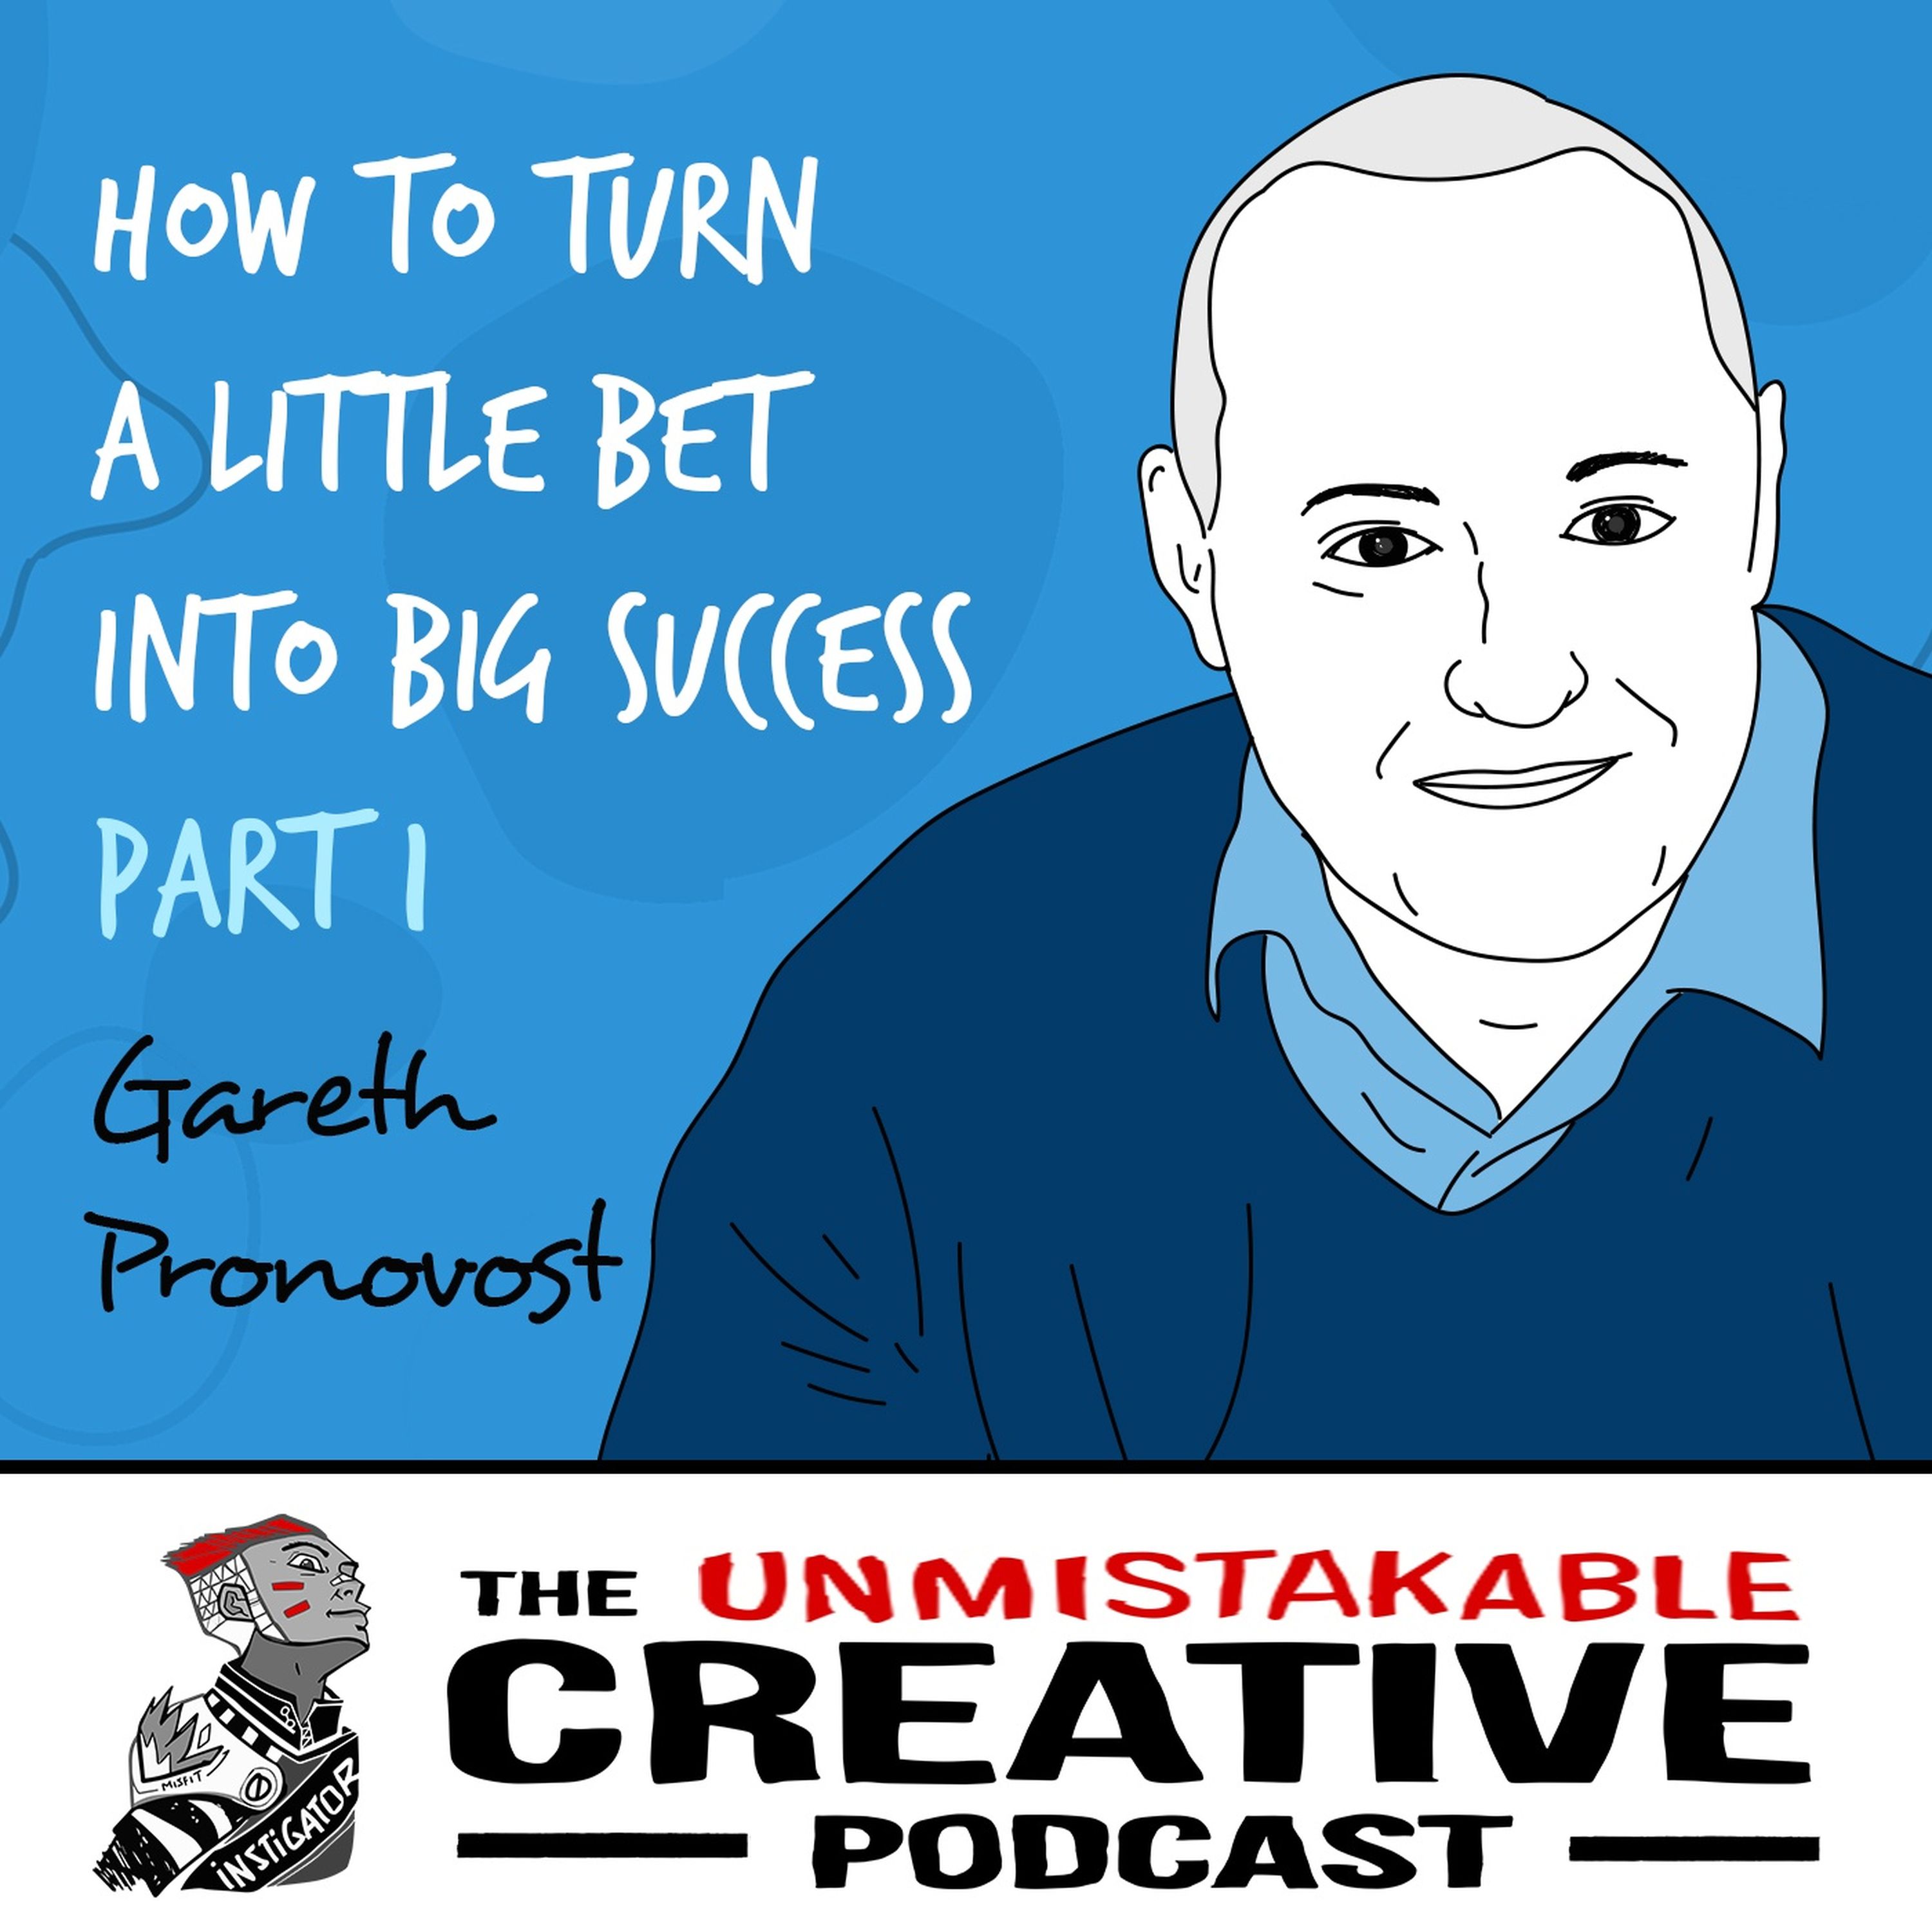 Gareth Pronovost | How to Turn a Little Bet into Big Success - Part 1 Image